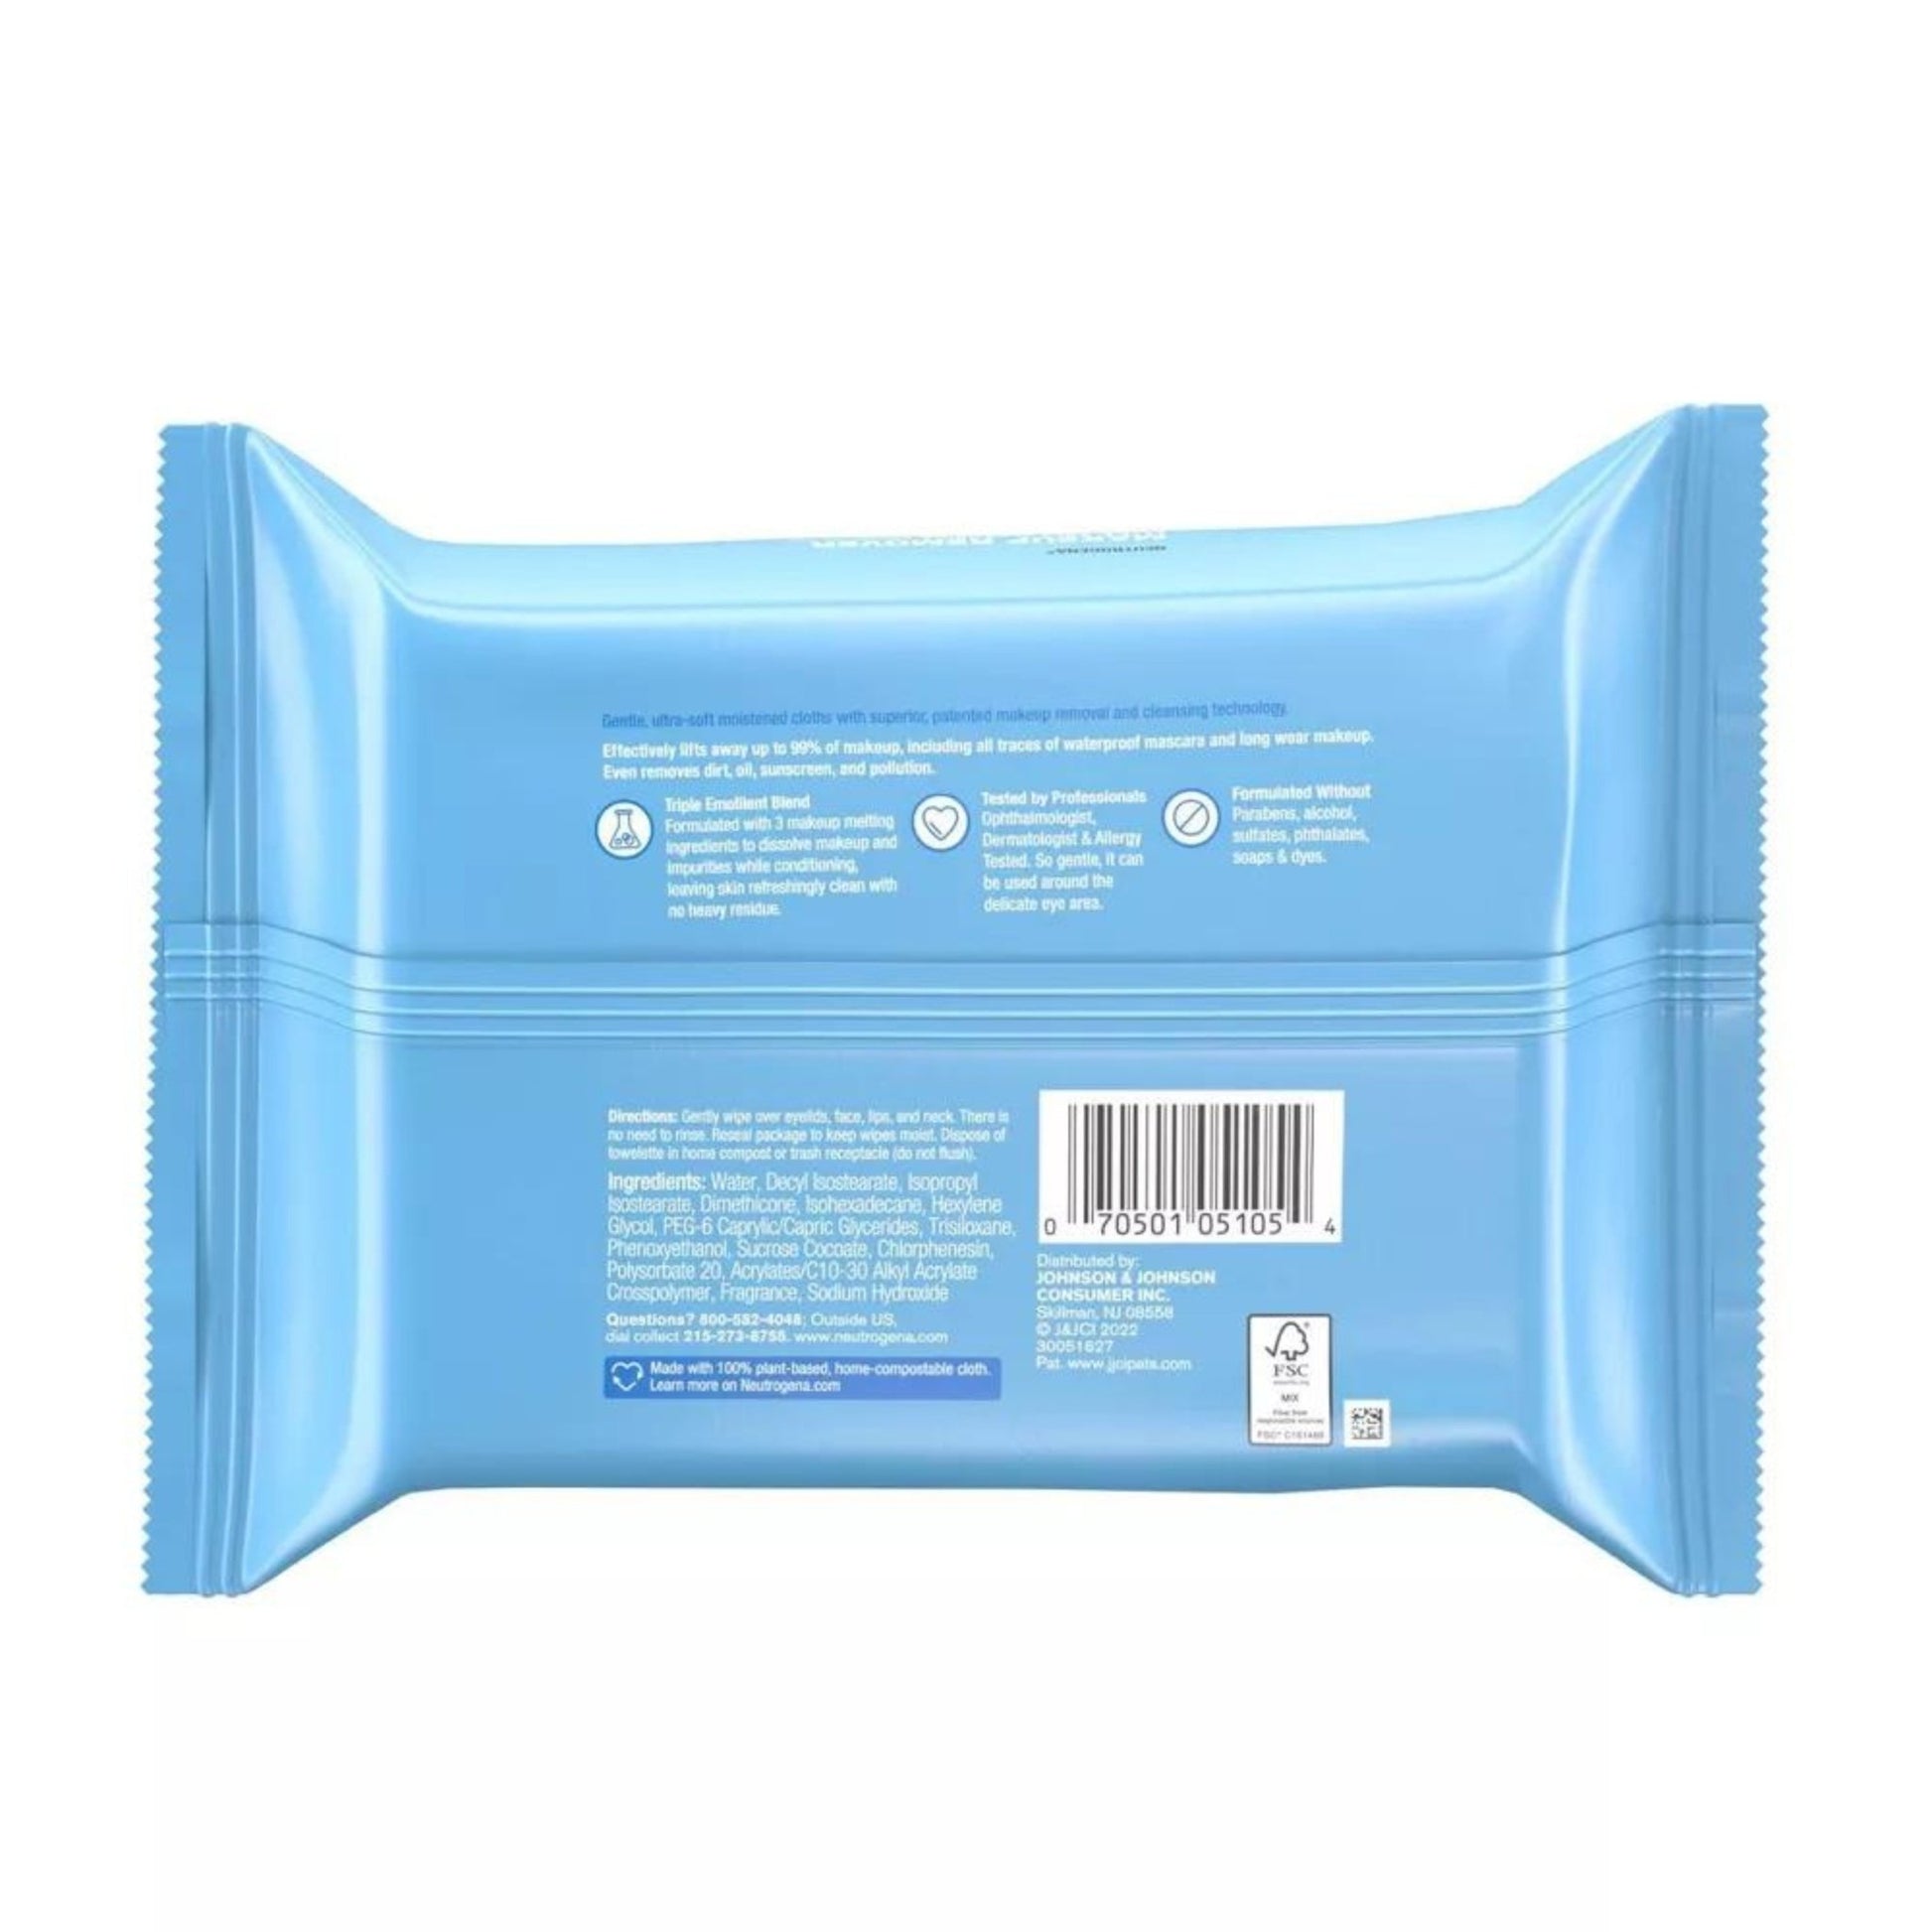 Neutrogena Makeup Remover Cleansing Towelettes & Face Wipes - 25ct